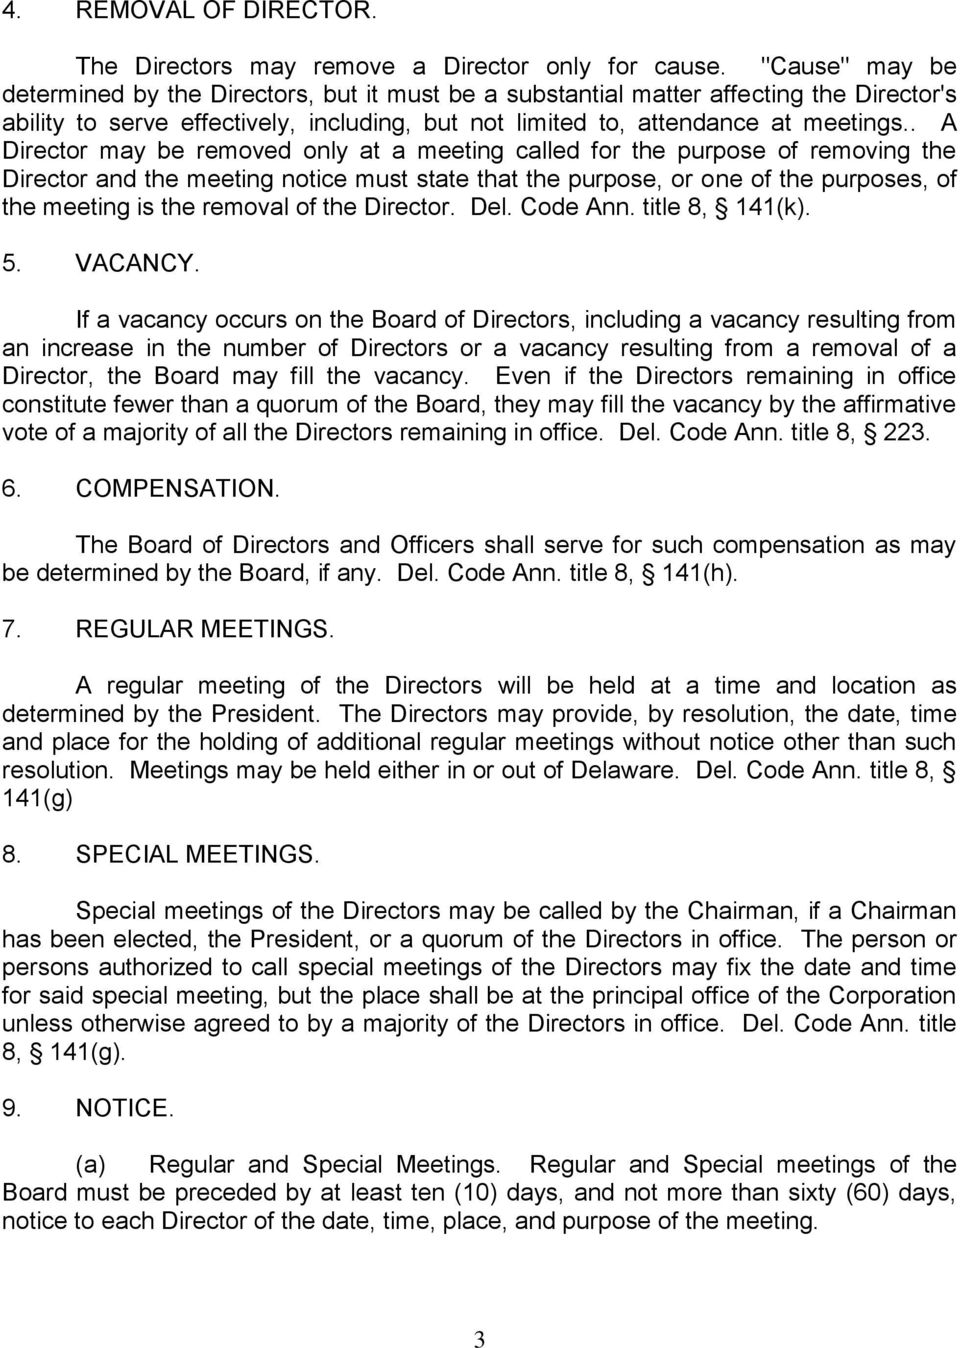 . A Director may be removed only at a meeting called for the purpose of removing the Director and the meeting notice must state that the purpose, or one of the purposes, of the meeting is the removal